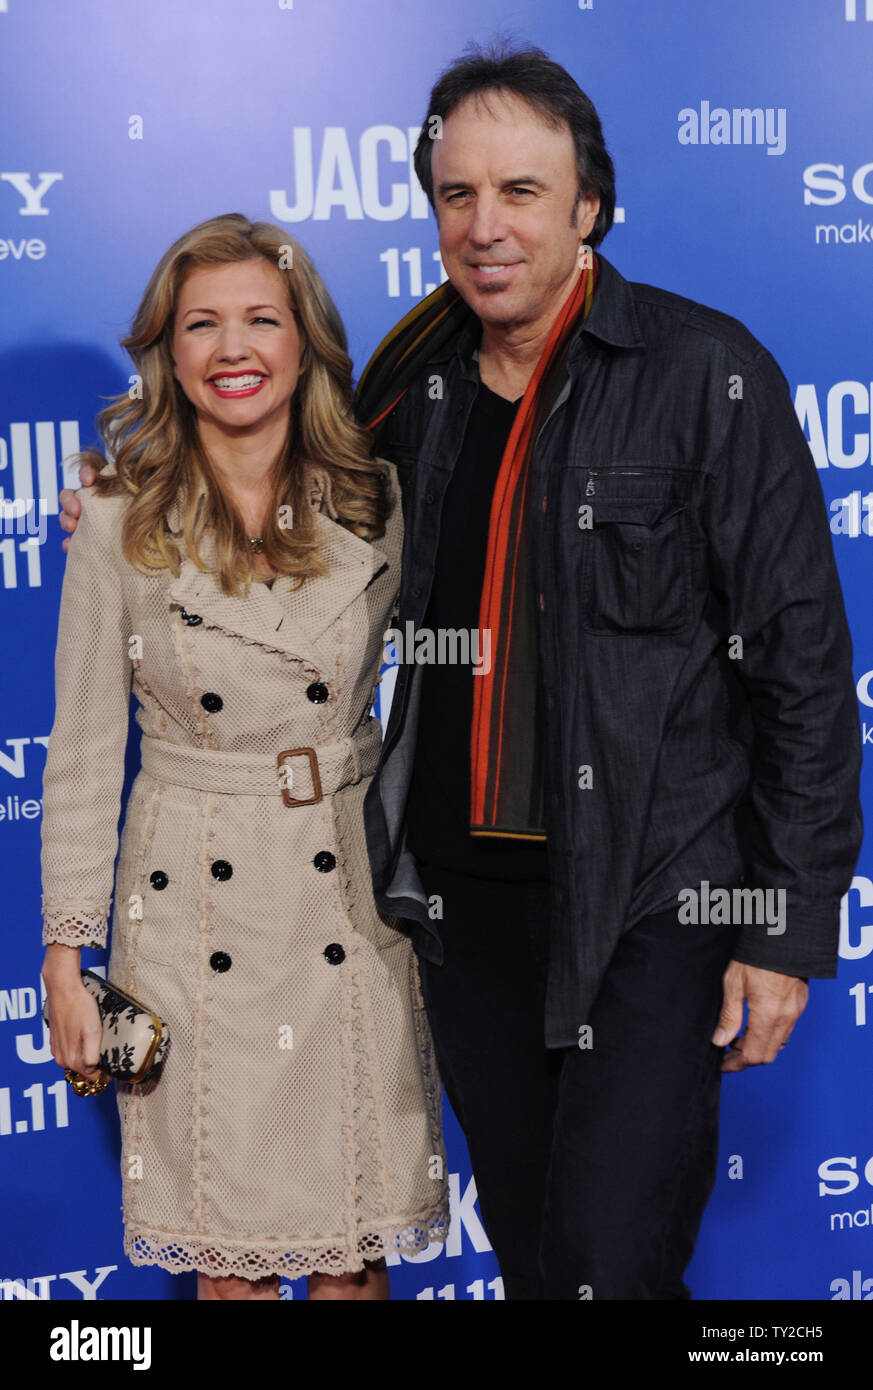 Actor Kevin Nealon and his wife Susan Yeagley attend the premiere of the motion picture comedy 'Jack and Jill' at the Regency Village Theatre in the Westwood section of Los Angeles on November 6, 2011.  UPU/Jim Ruymen Stock Photo